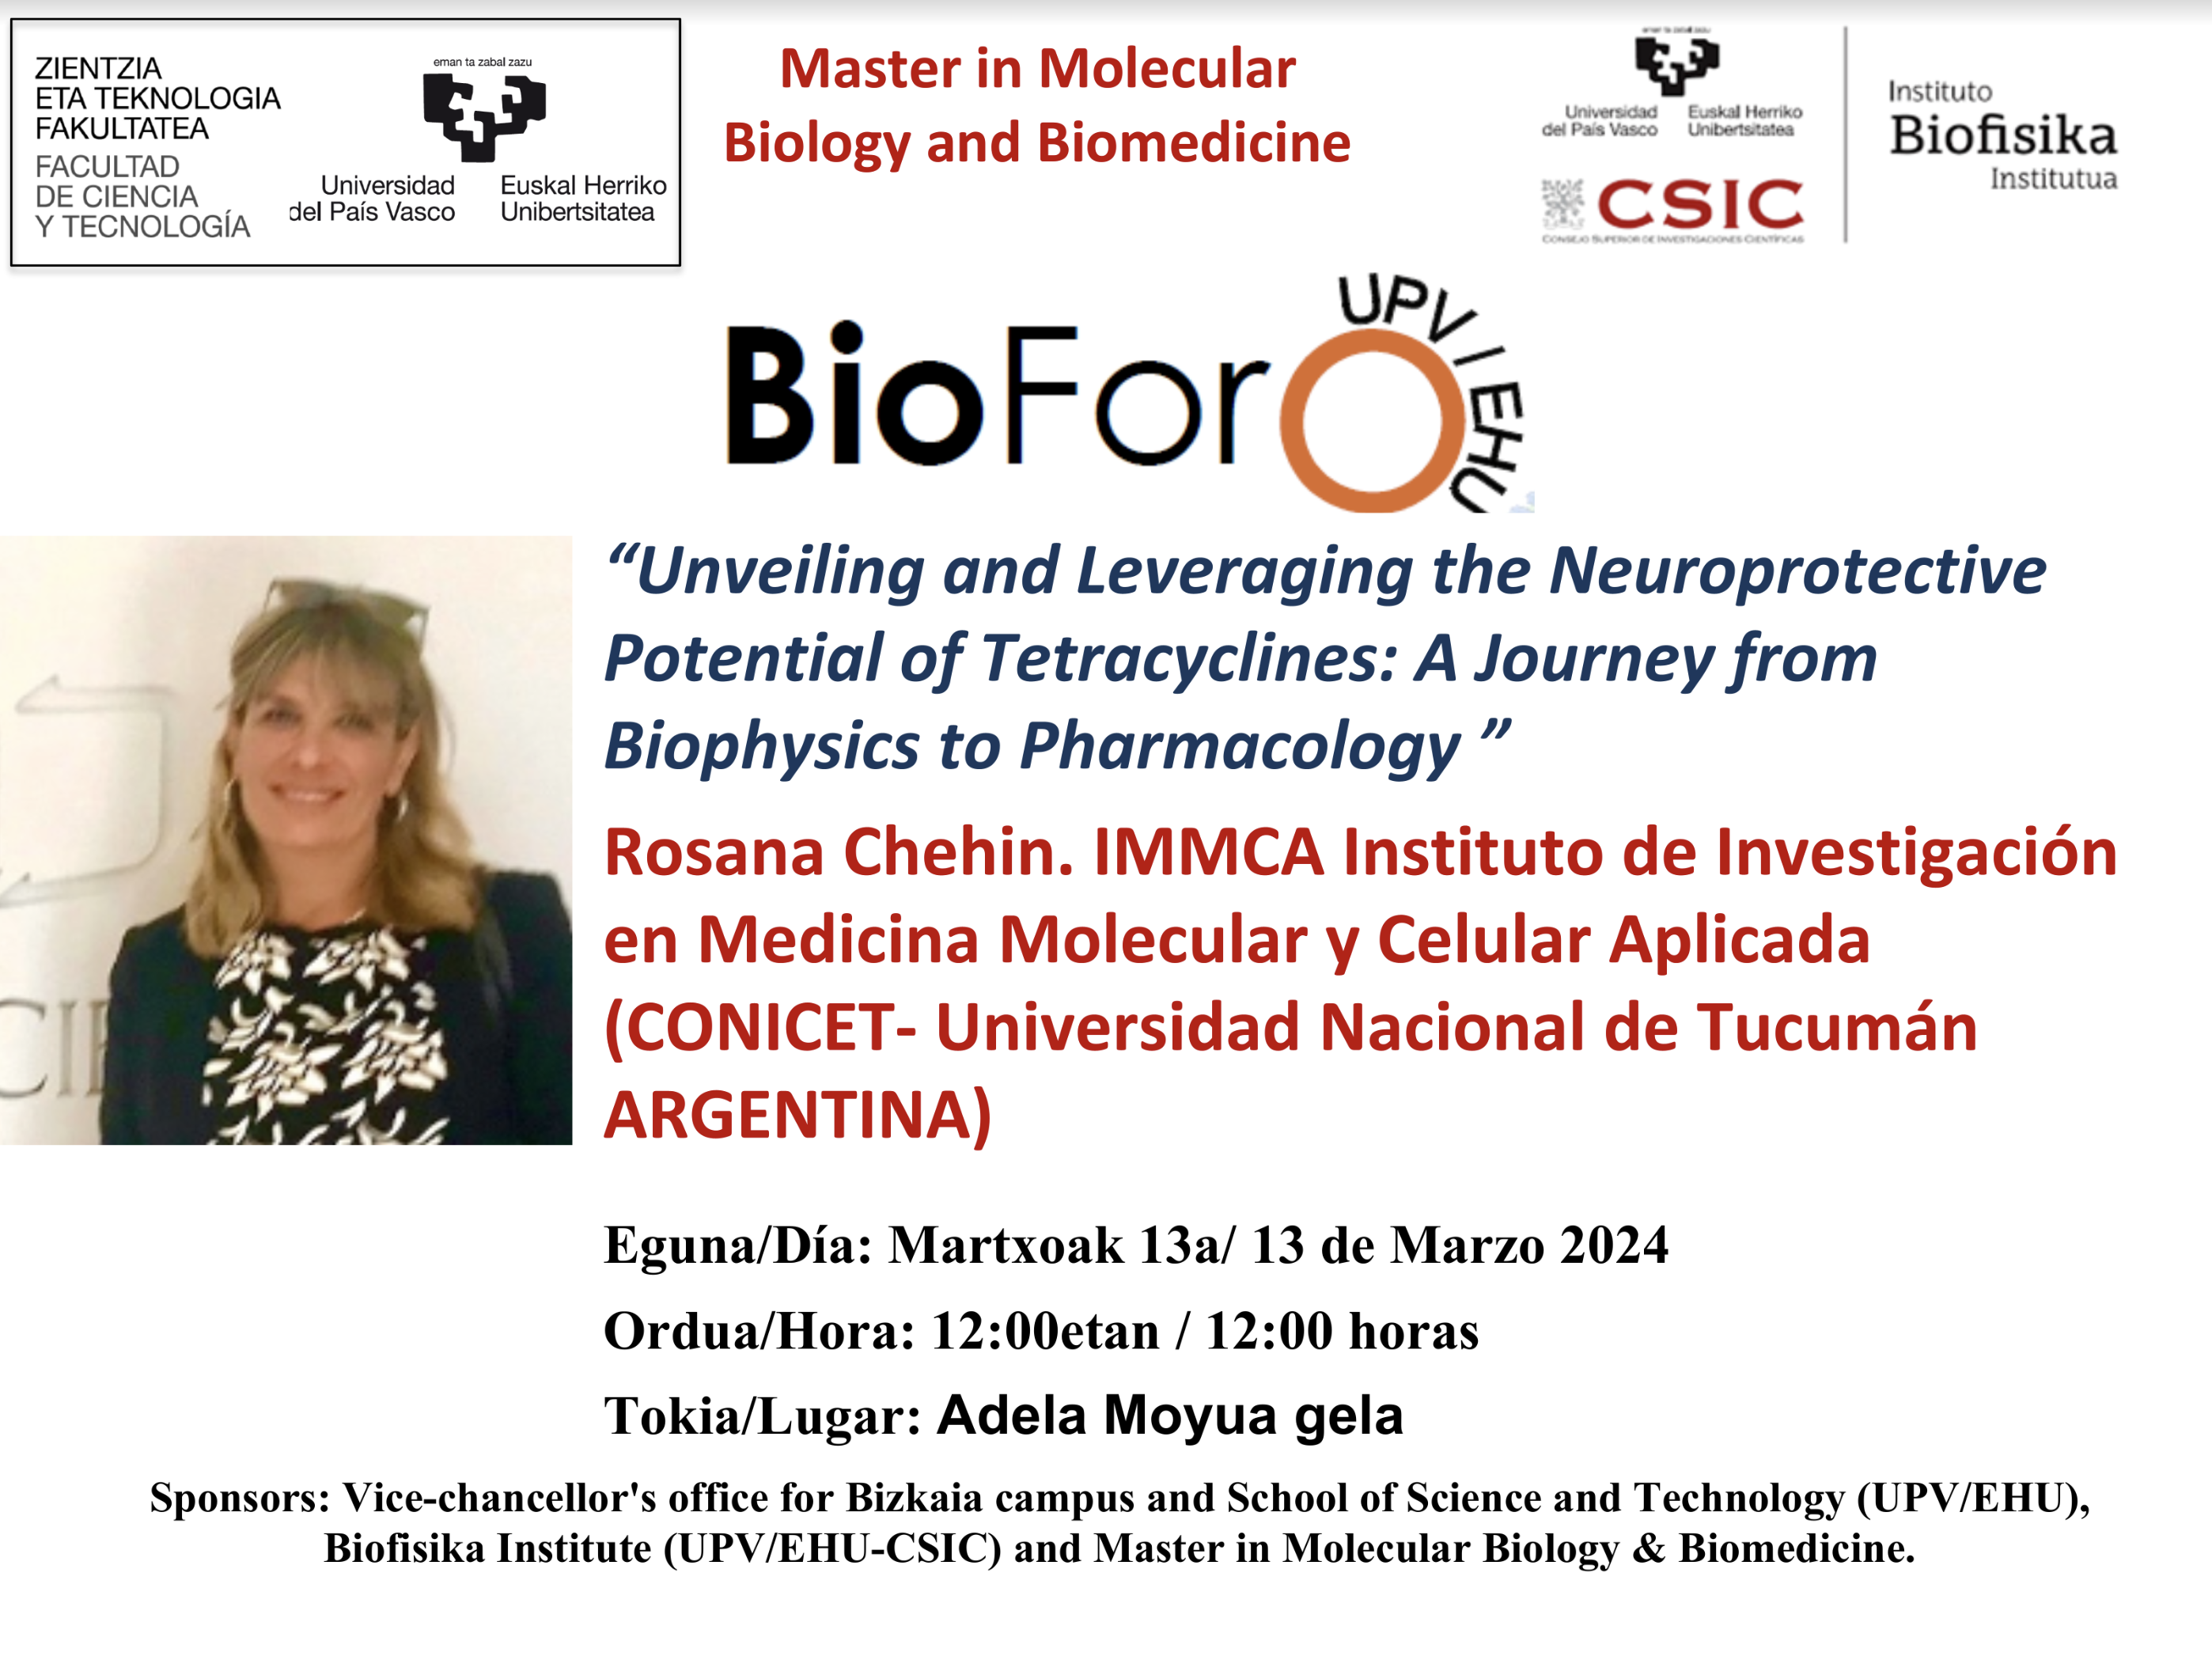 BioForo seminar: “Unveiling and Leveraging the Neuroprotective Potential of Tetracyclines: A Journey from Biophysics to Pharmacology”